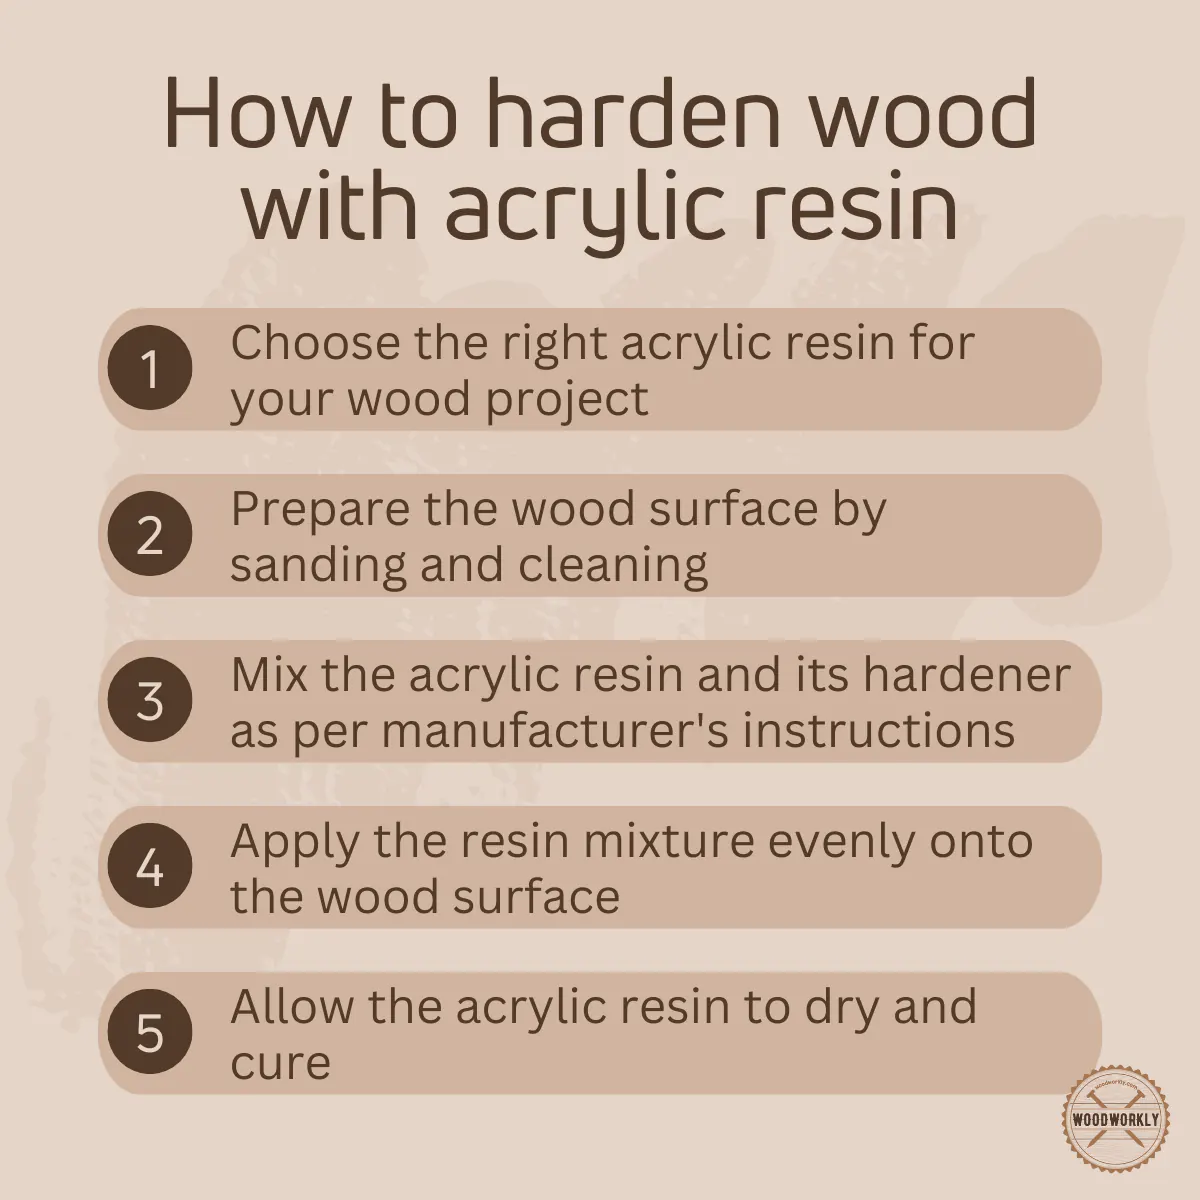 How to harden wood with acrylic resin